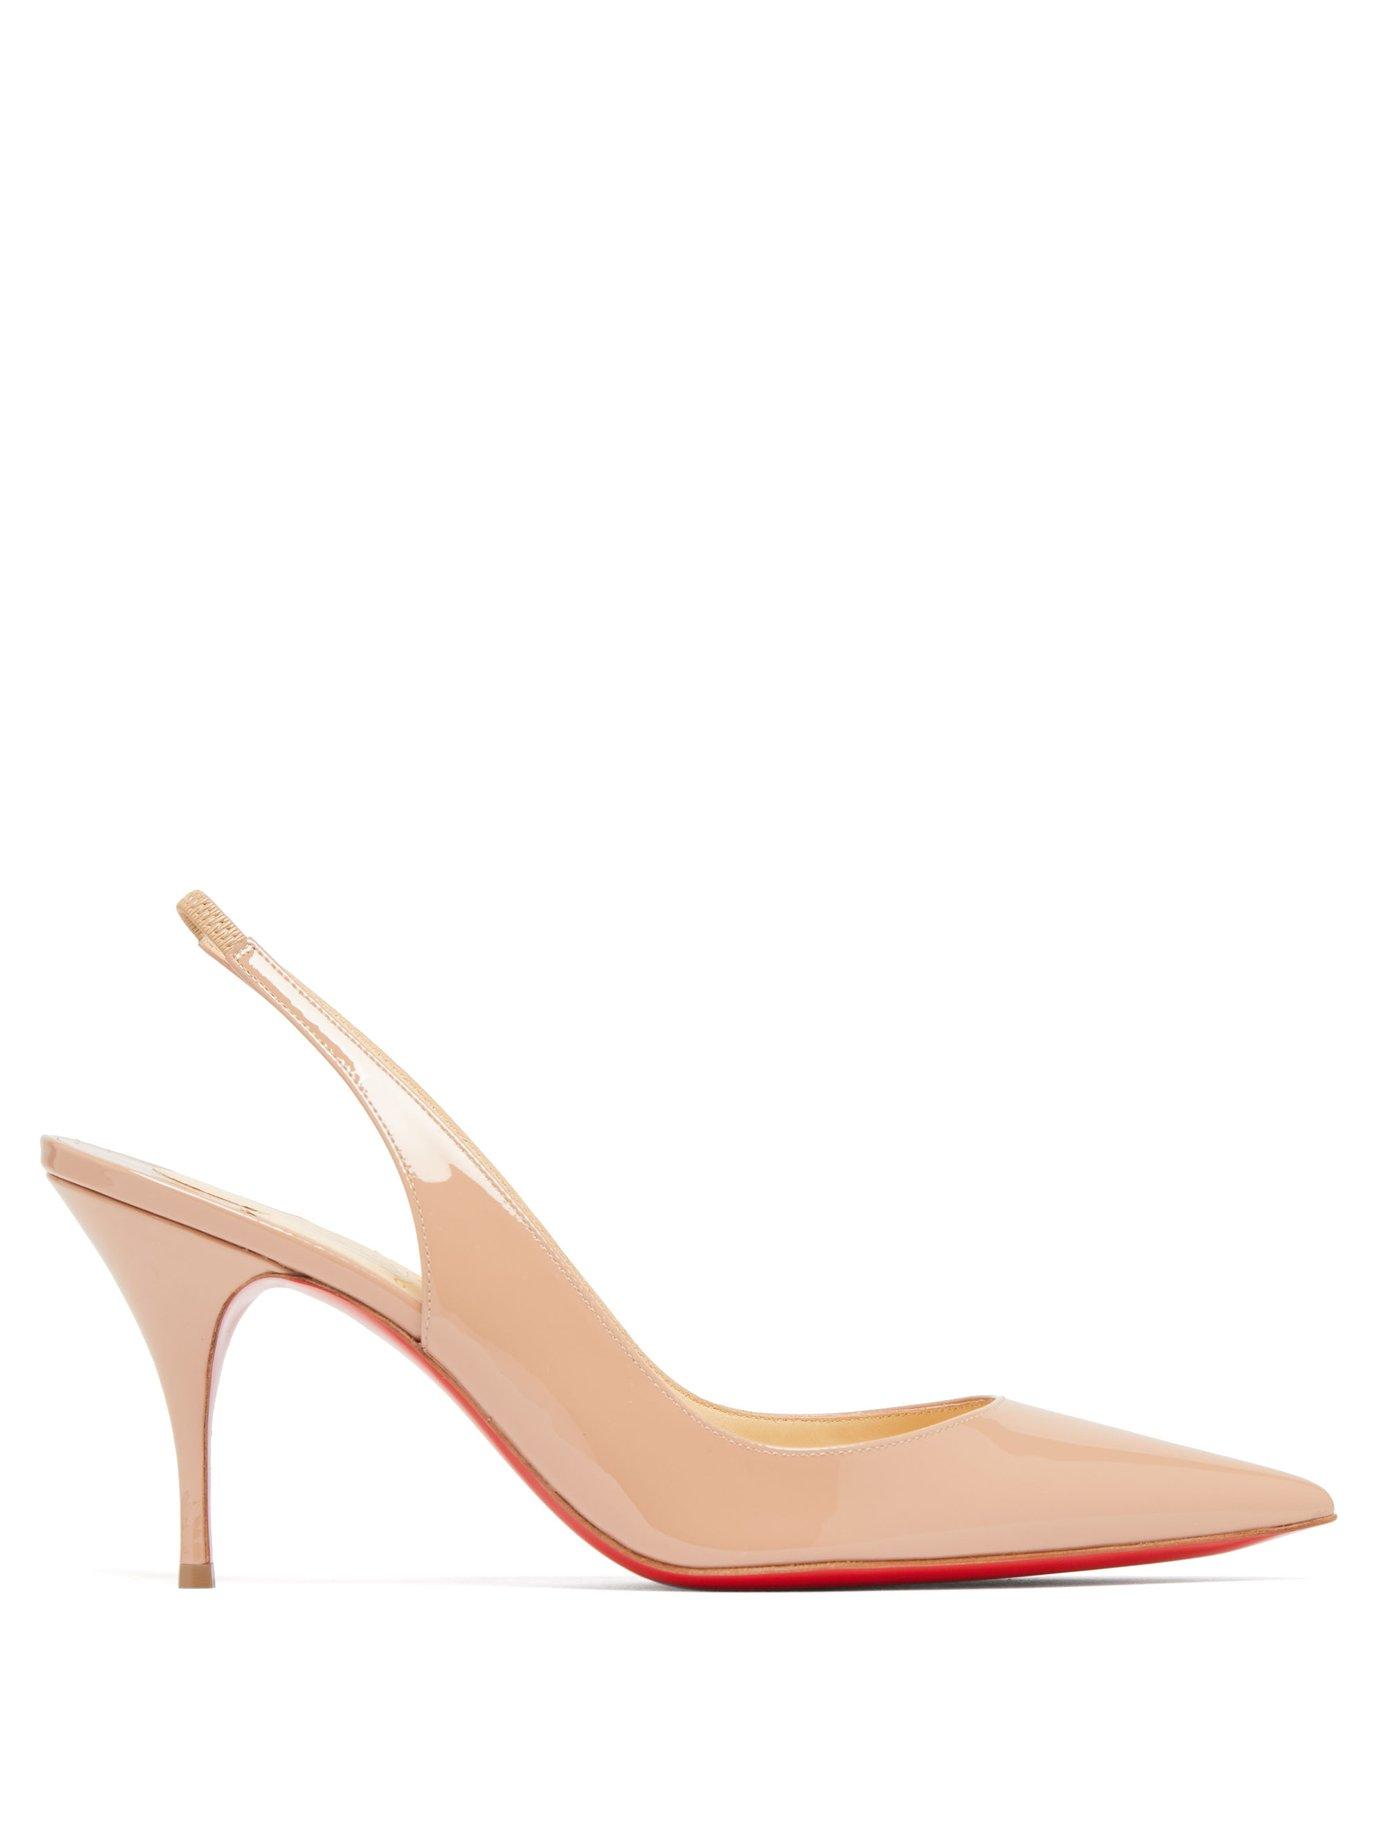 Christian Louboutin Clare 80 Patent Slingback Pump | Lyst